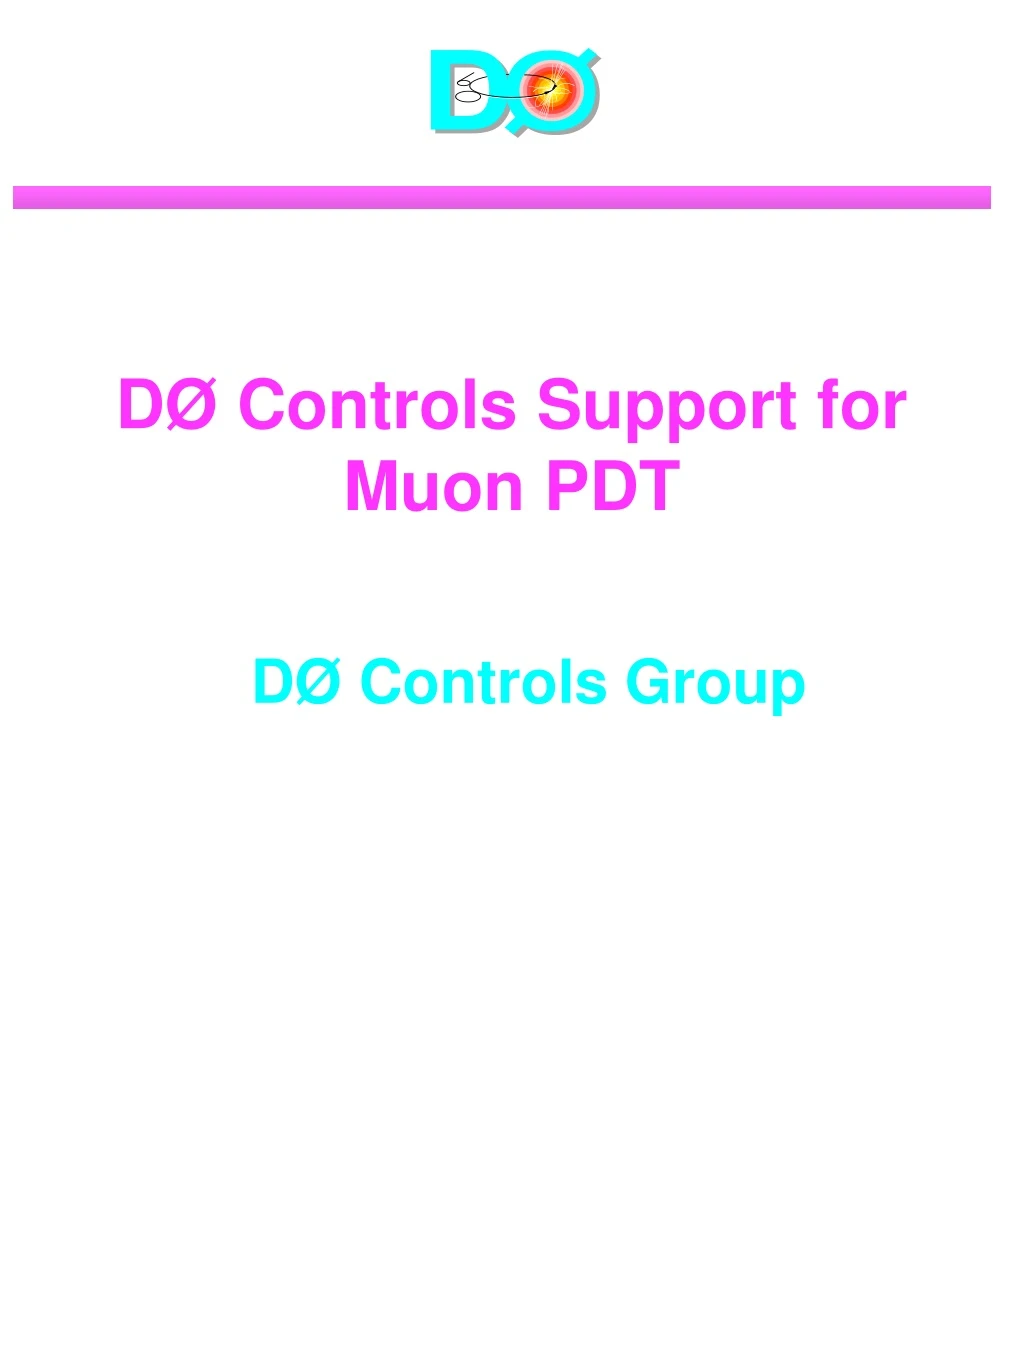 d controls support for muon pdt